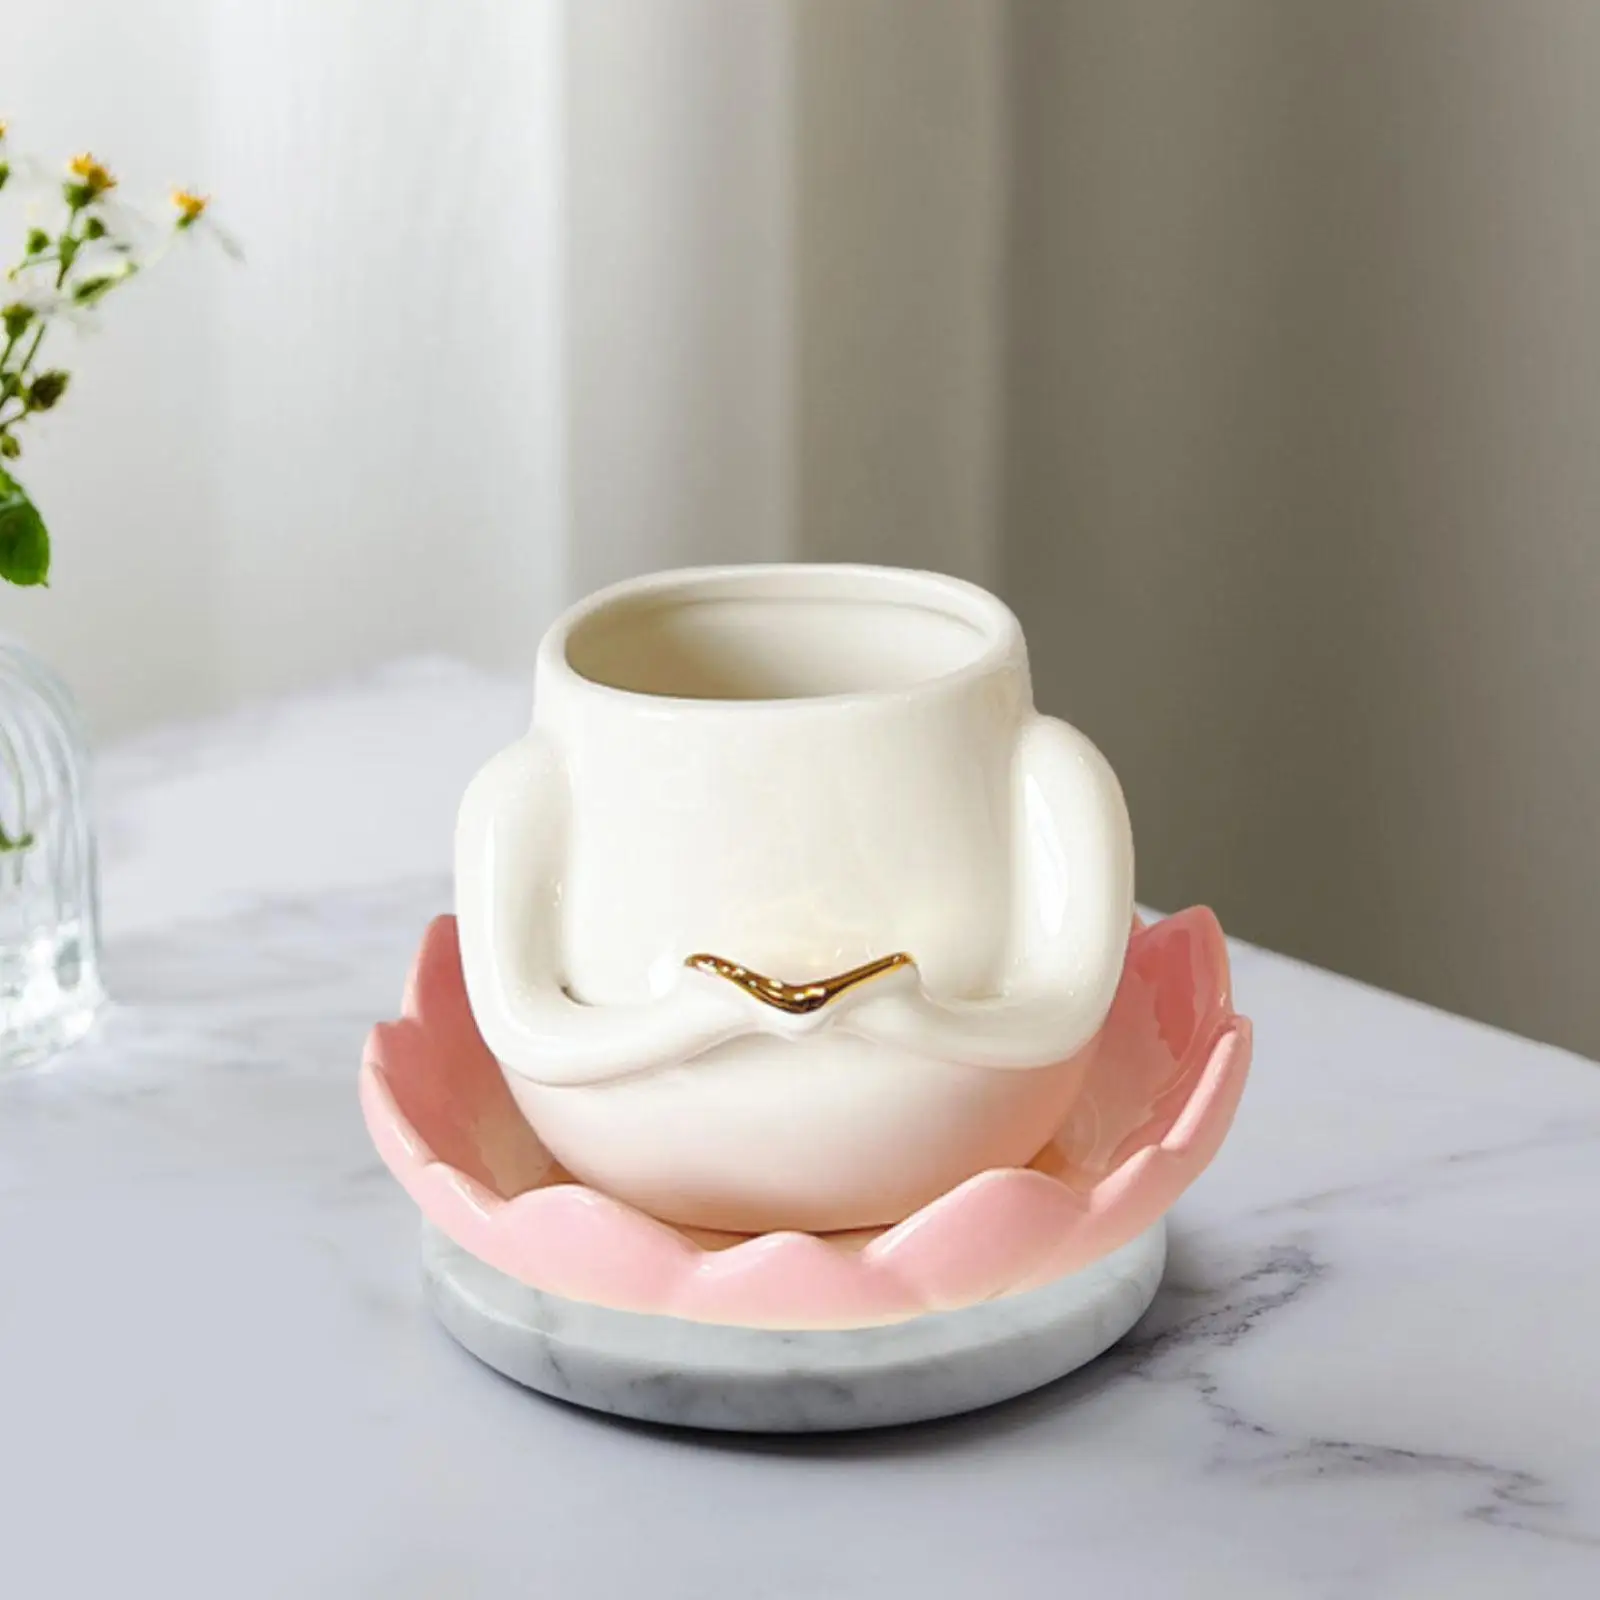 Novelty Ceramic Lotus Water Mug 13.5oz Cute Creative Cups Drinking Cup Unique Cups for Bar Home Cafe Party Housewarming Gift